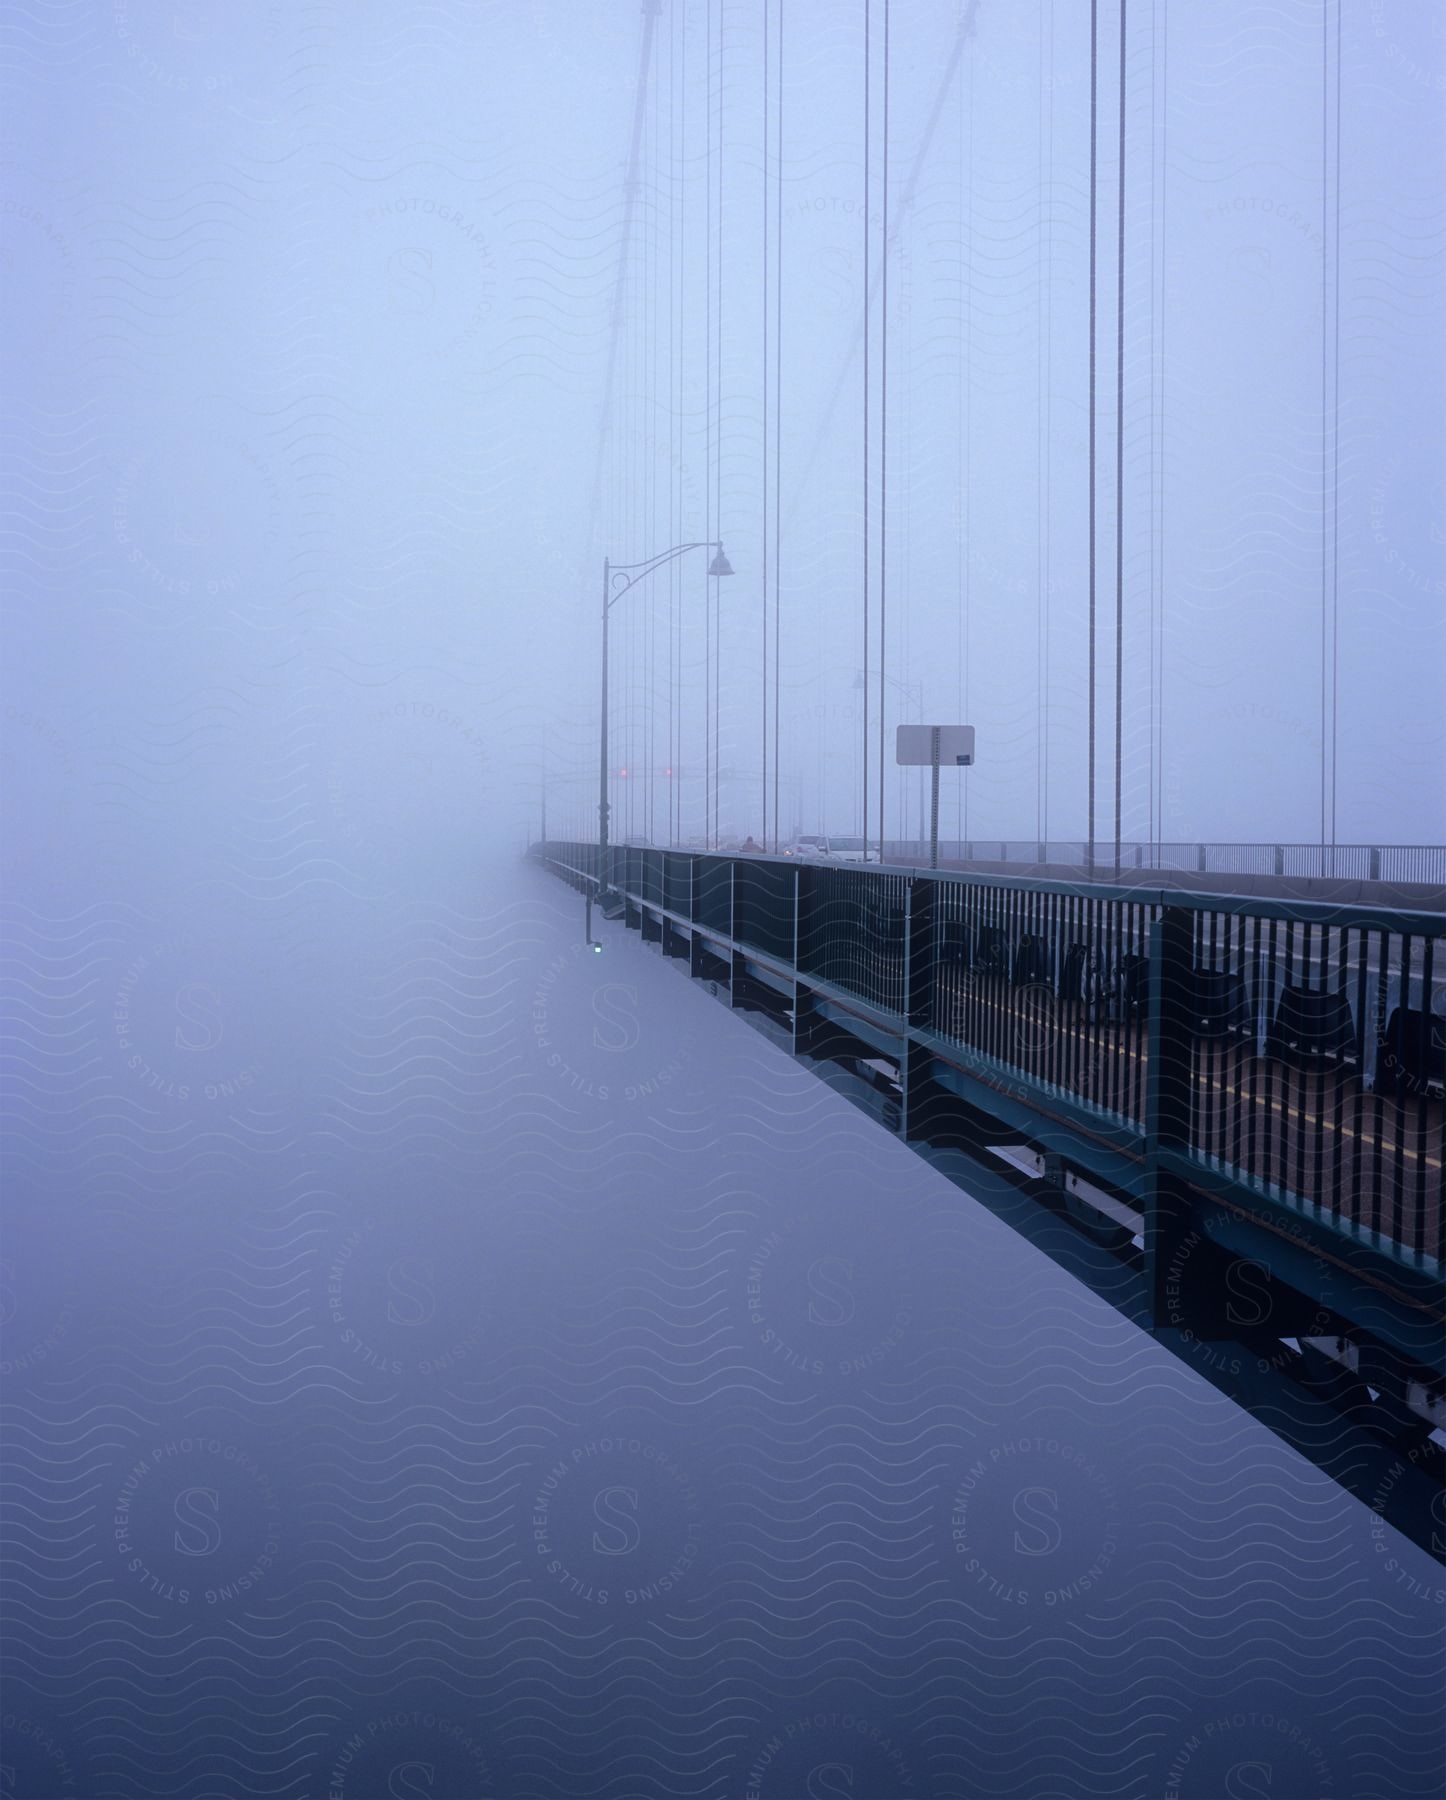 A bridge in foggy weather with an outdoor view